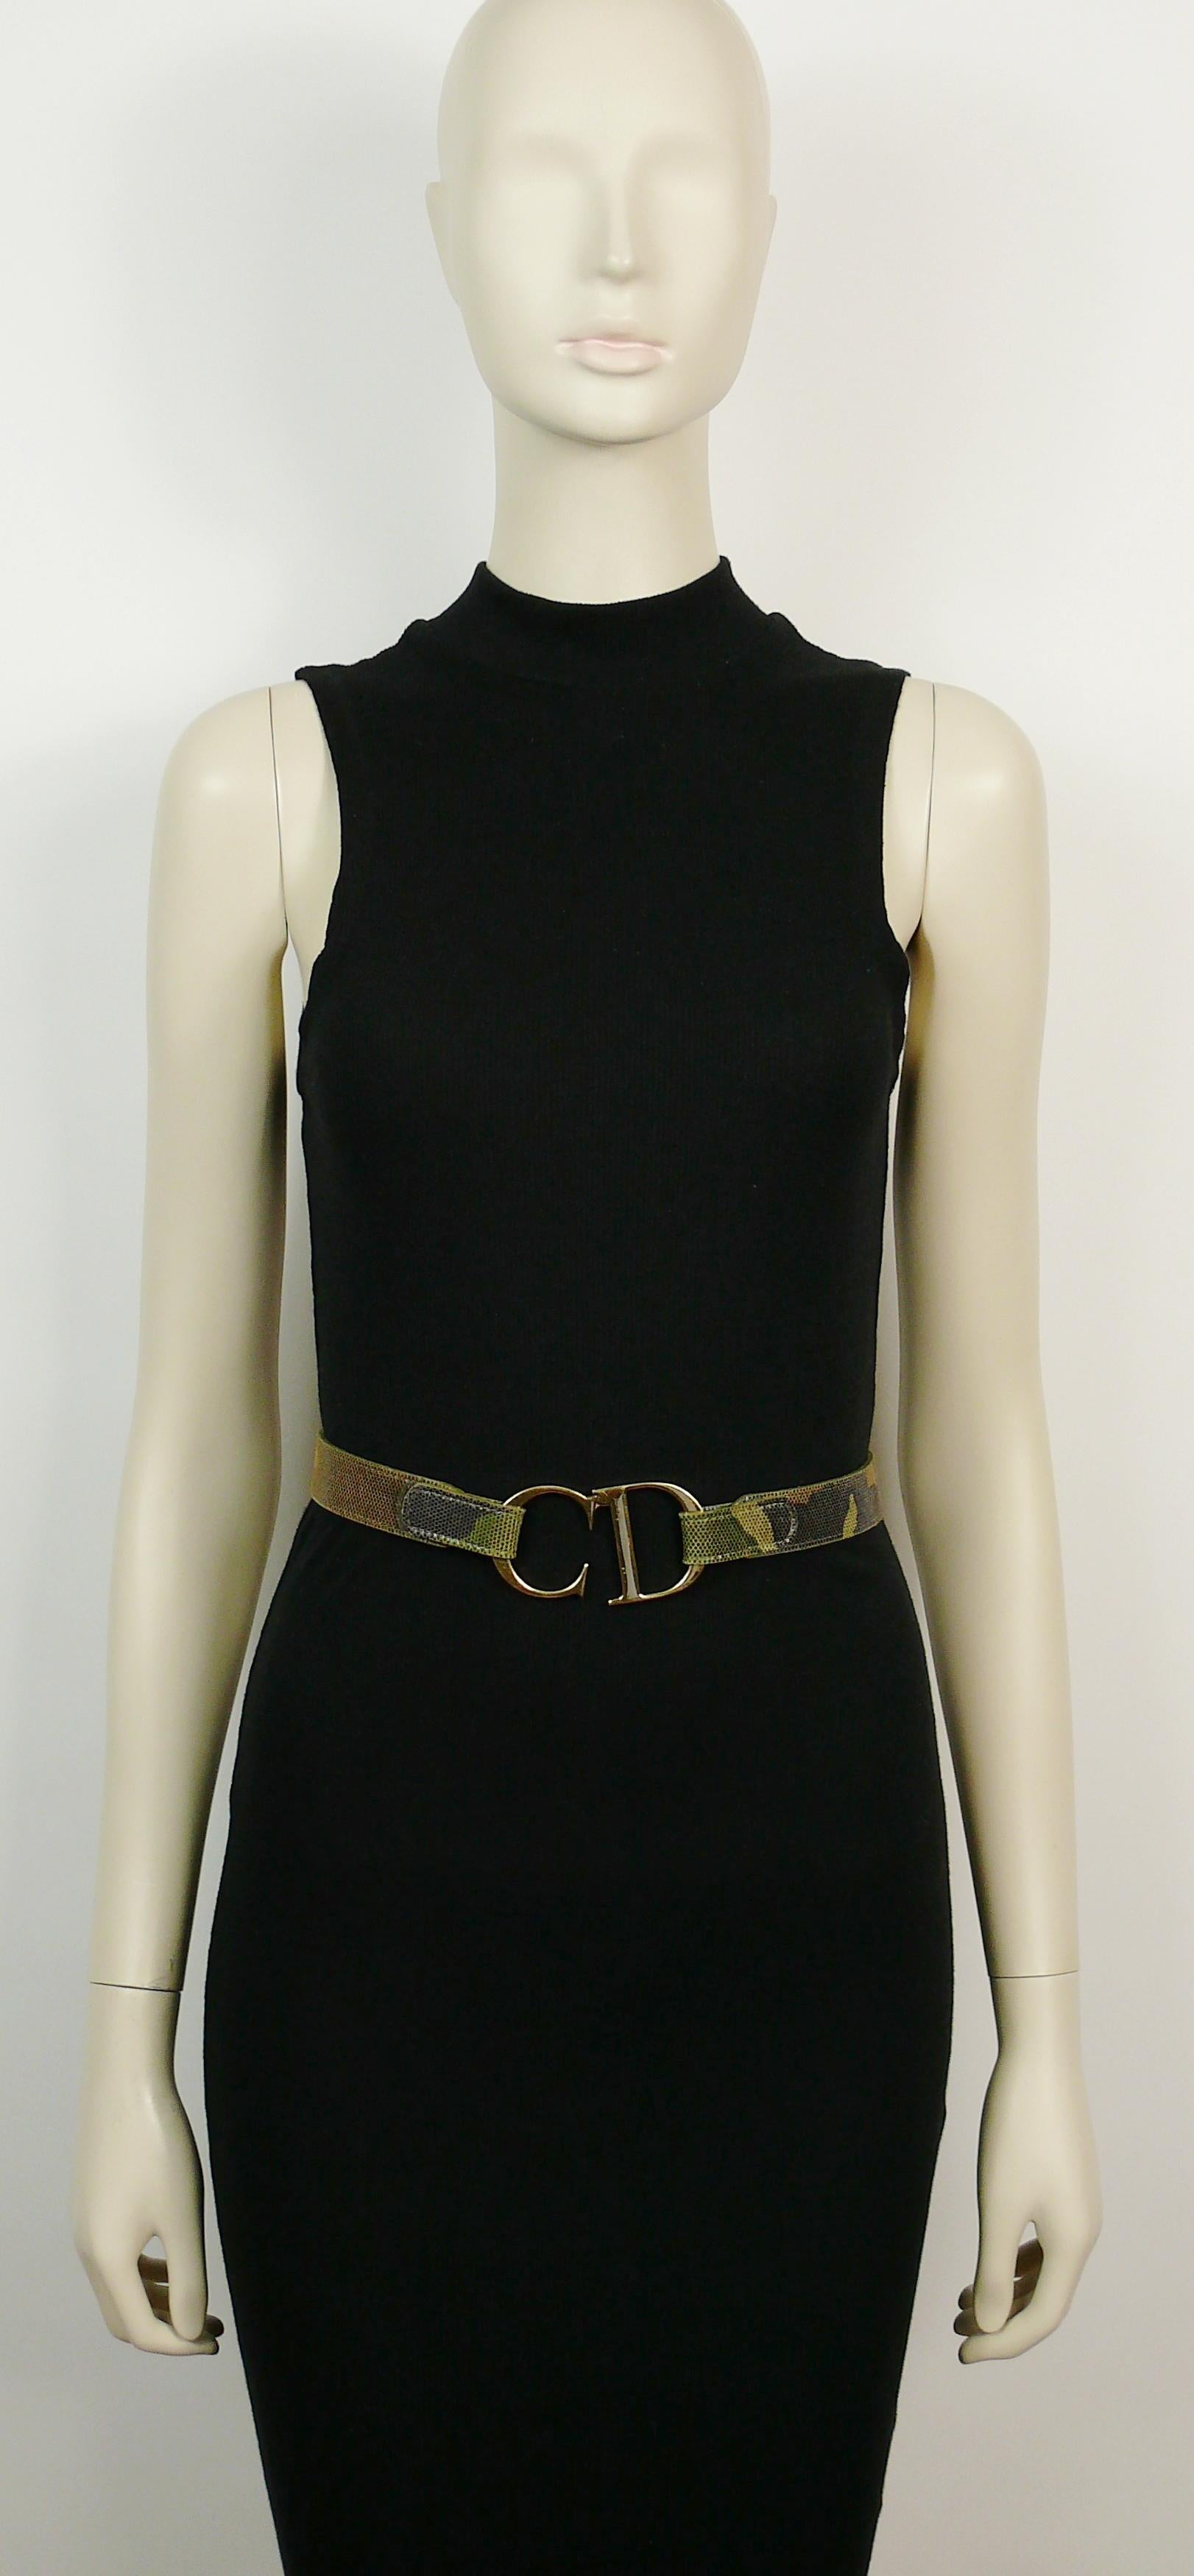 CHRISTIAN DIOR vintage rare camouflage print leather belt featuring a lizard skin pattern and a stunning gold tone articulated CD logo buckle.

Early 2000s.

Velcro strap closure at front.

Embossed CHRISTIAN DIOR on ther reverse of the